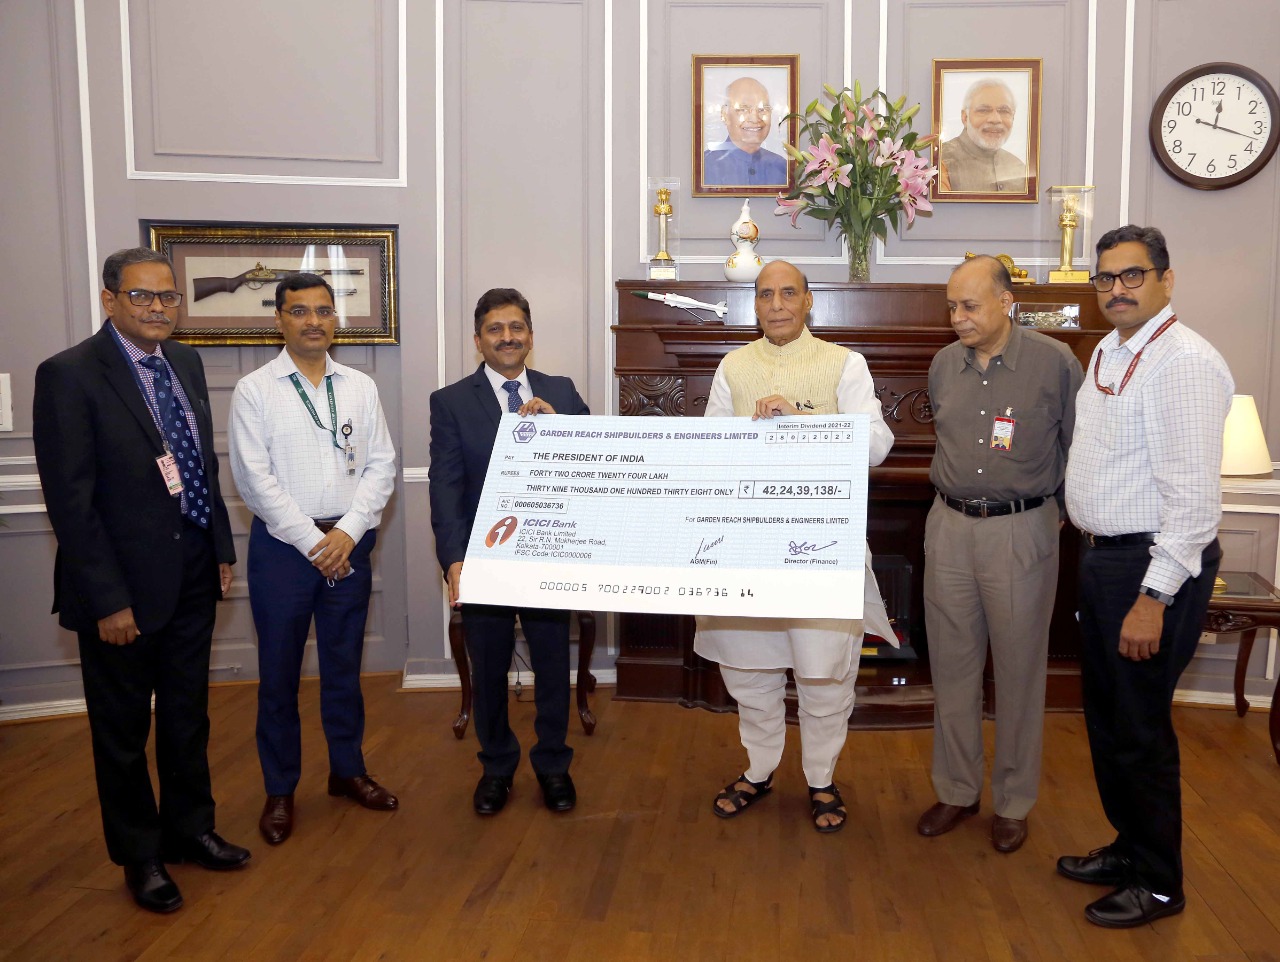 GRSE Pays Interim Dividend of Rs. 56.70 Crores for FY 2021-22:  Hands Over Dividend Cheque to Government of India